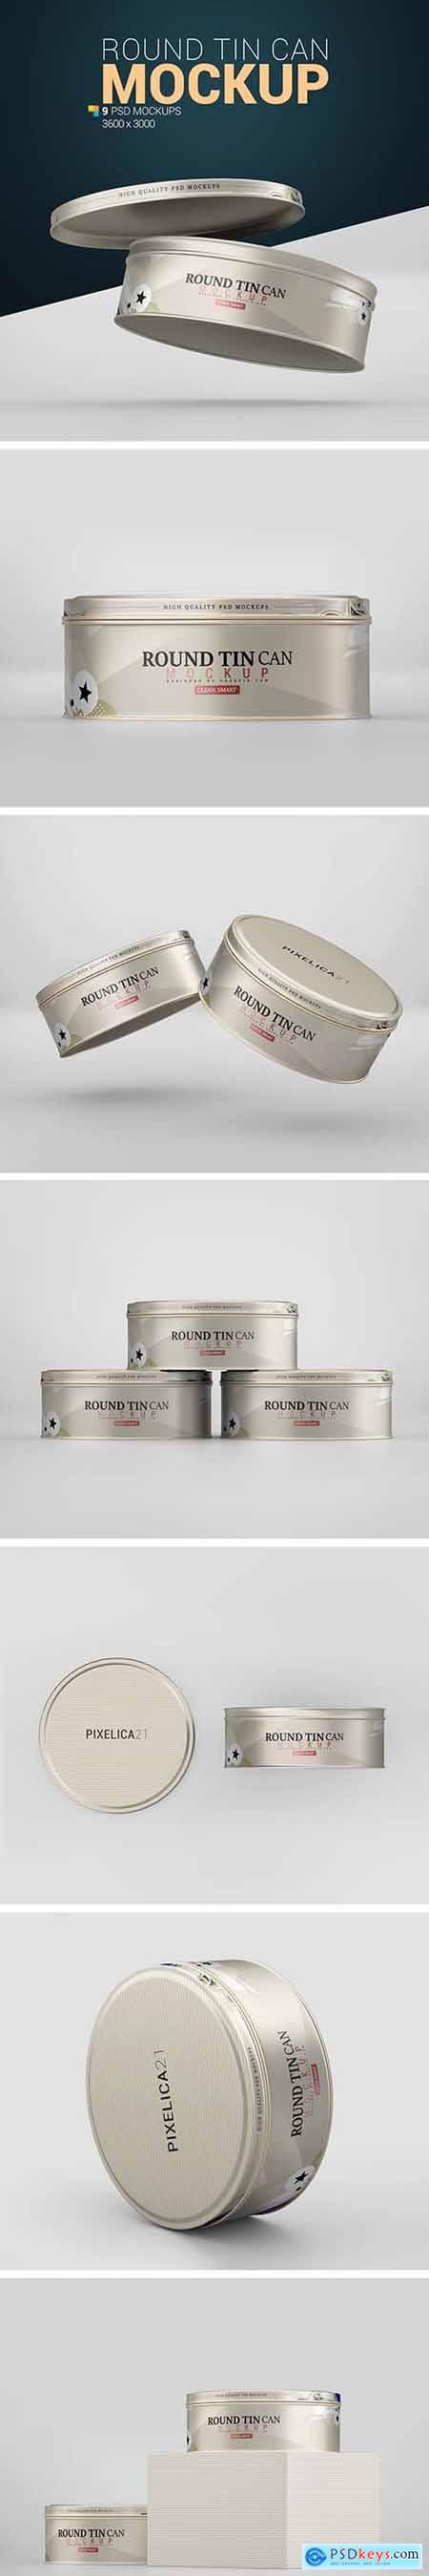 Download Round Tin Can Mockup Free Download Photoshop Vector Stock Image Via Torrent Zippyshare From Psdkeys Com